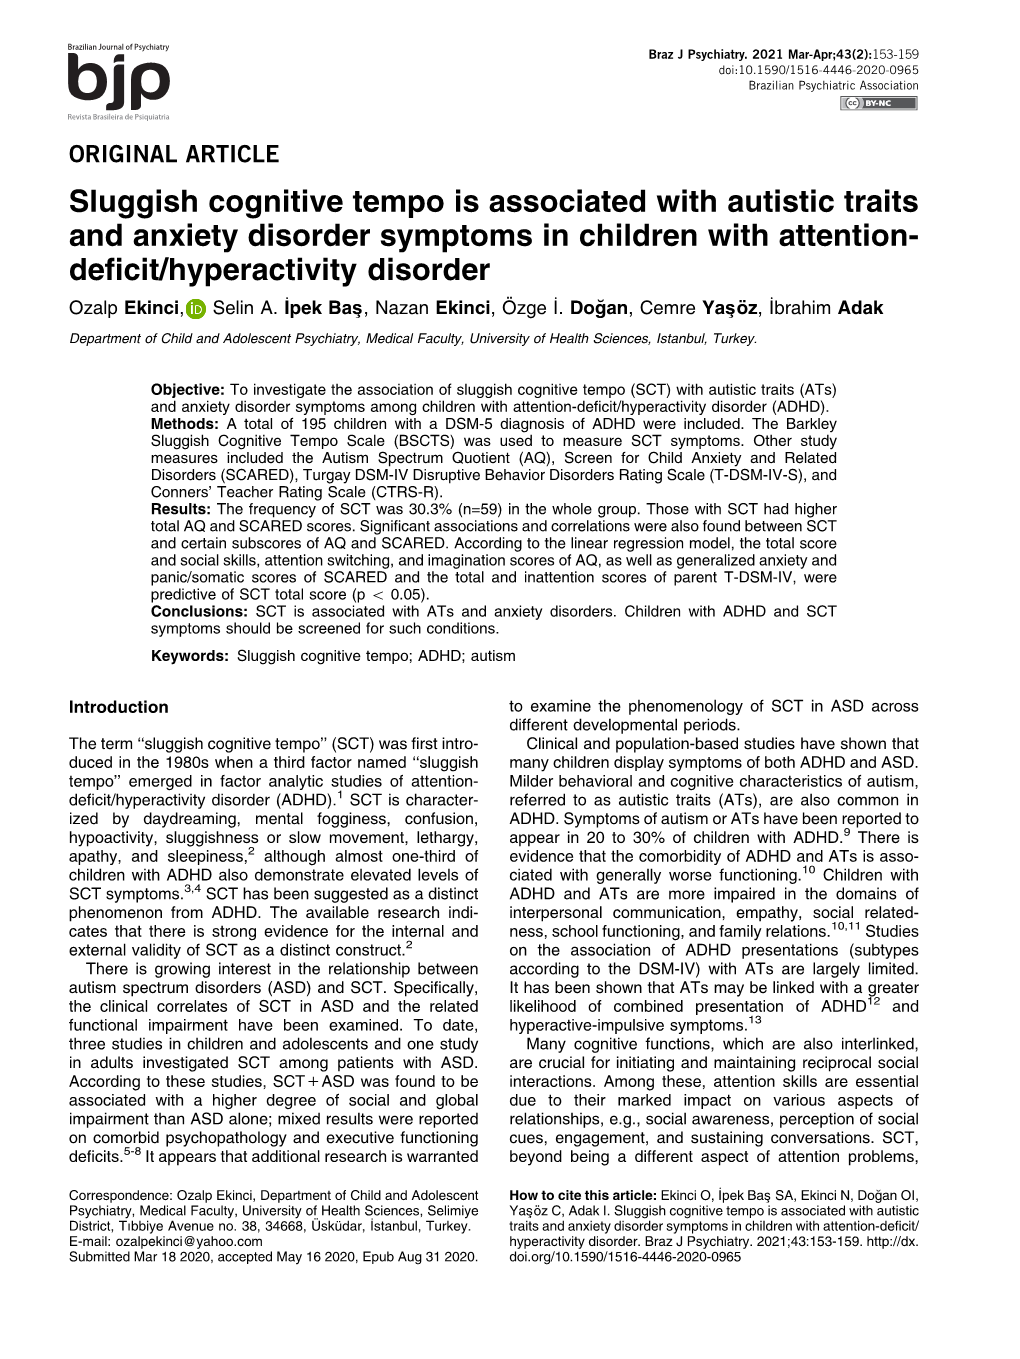 Sluggish Cognitive Tempo Is Associated with Autistic